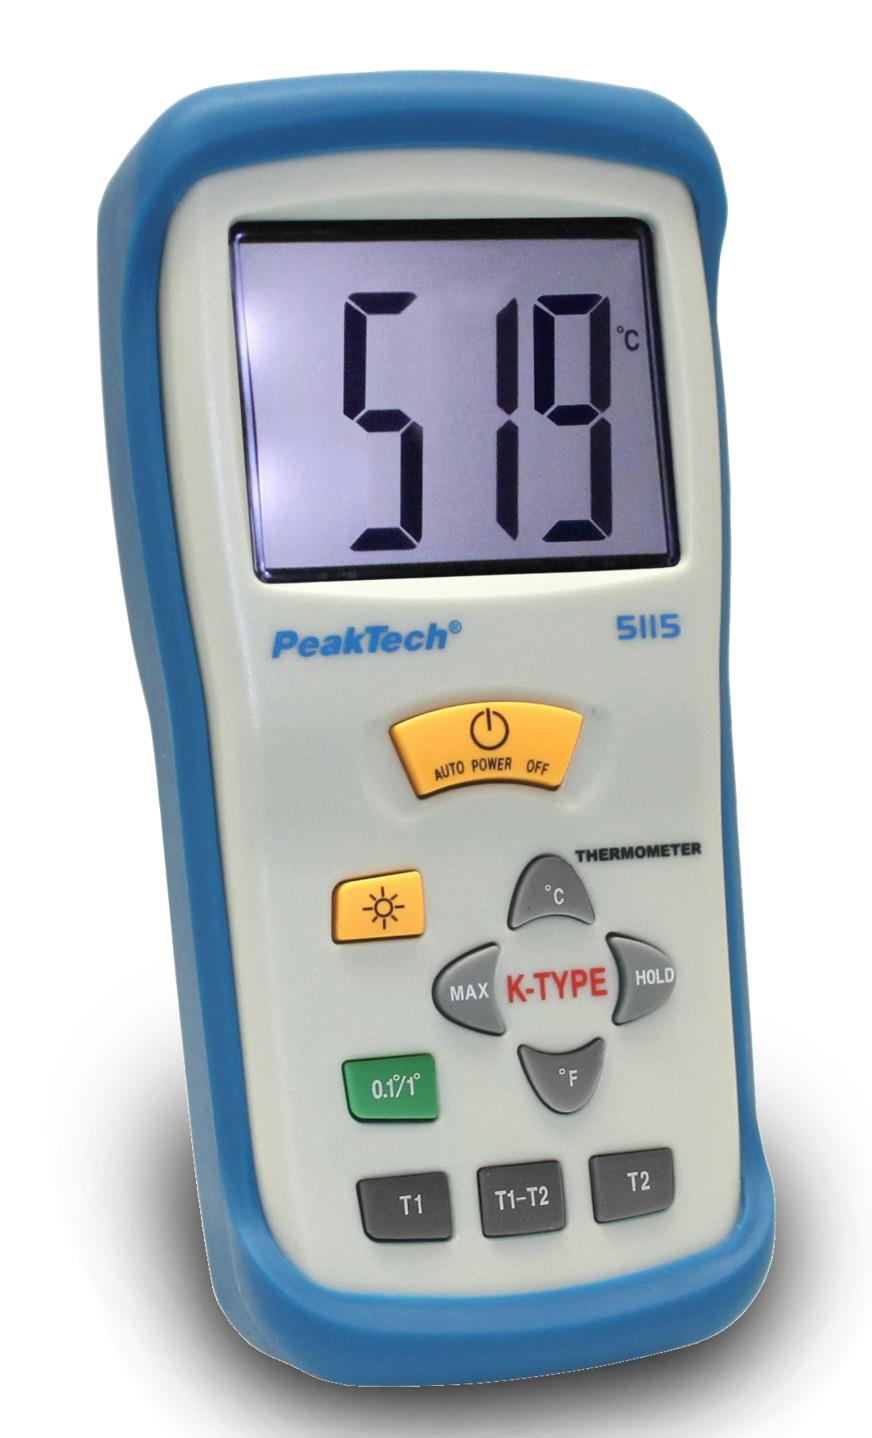 Digital-Thermometer, PeakTech® 5115